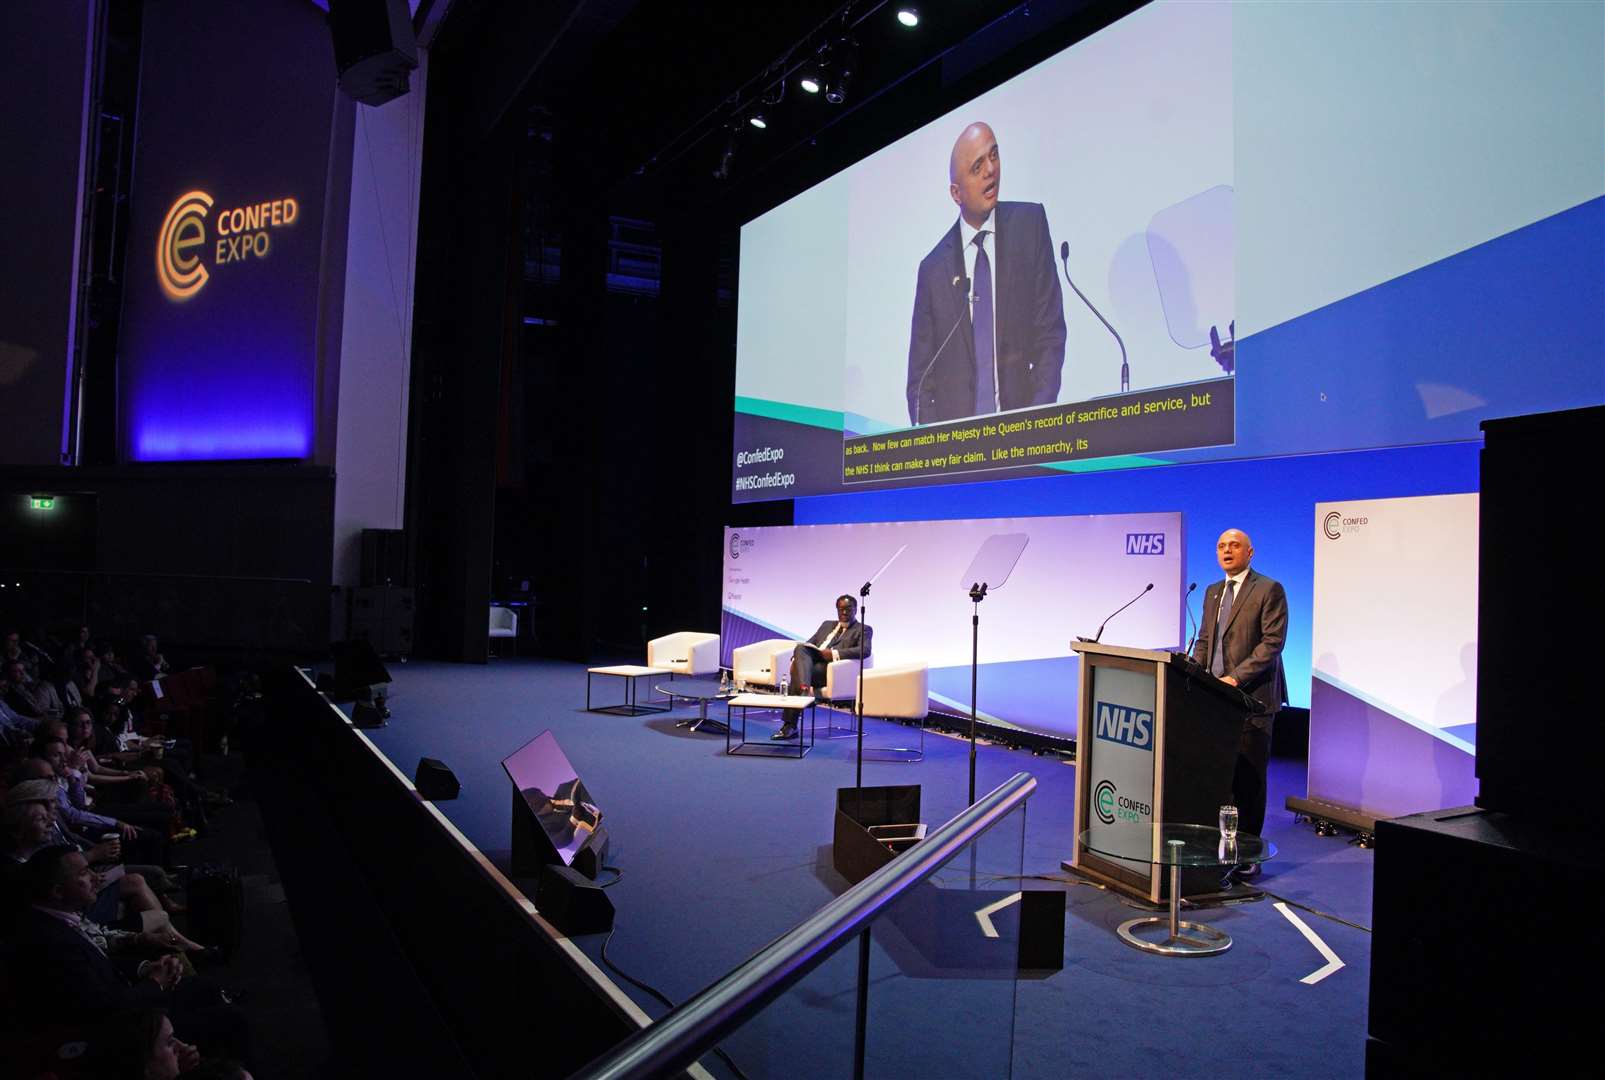 Health Secretary Sajid Javid speaking during the NHS ConfedExpo at the ACC Liverpool (Peter Byrne/PA)